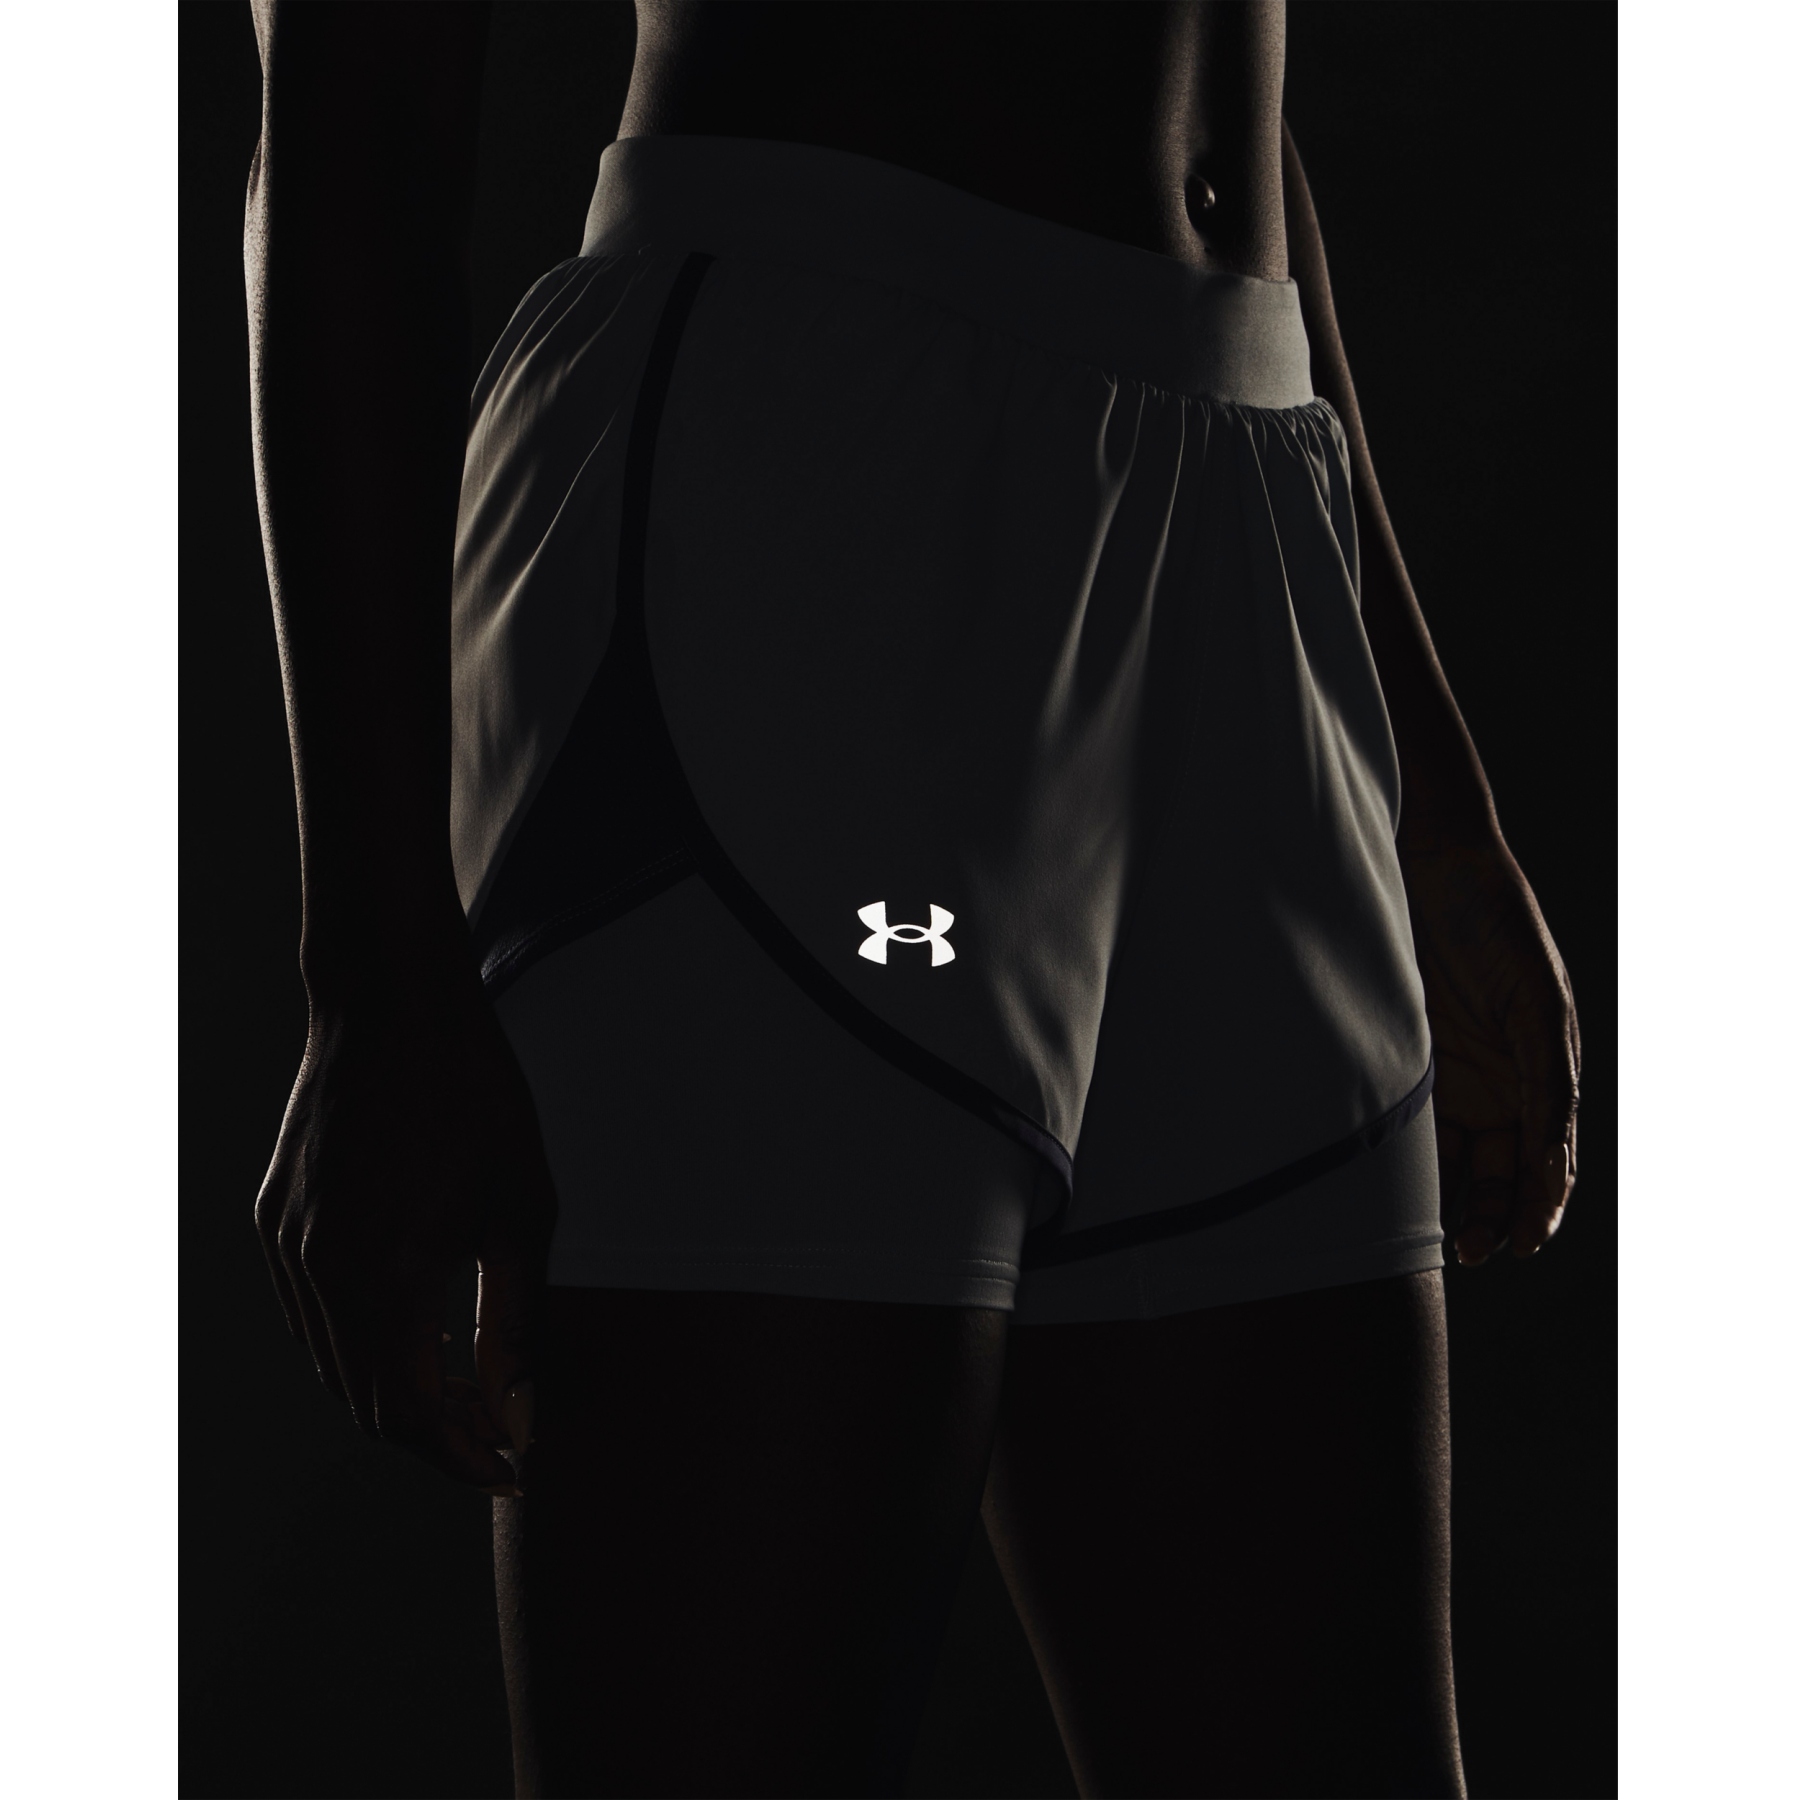 Under Armour UA Fly-By Elite 2-in-1 Shorts Women - Harbor Blue